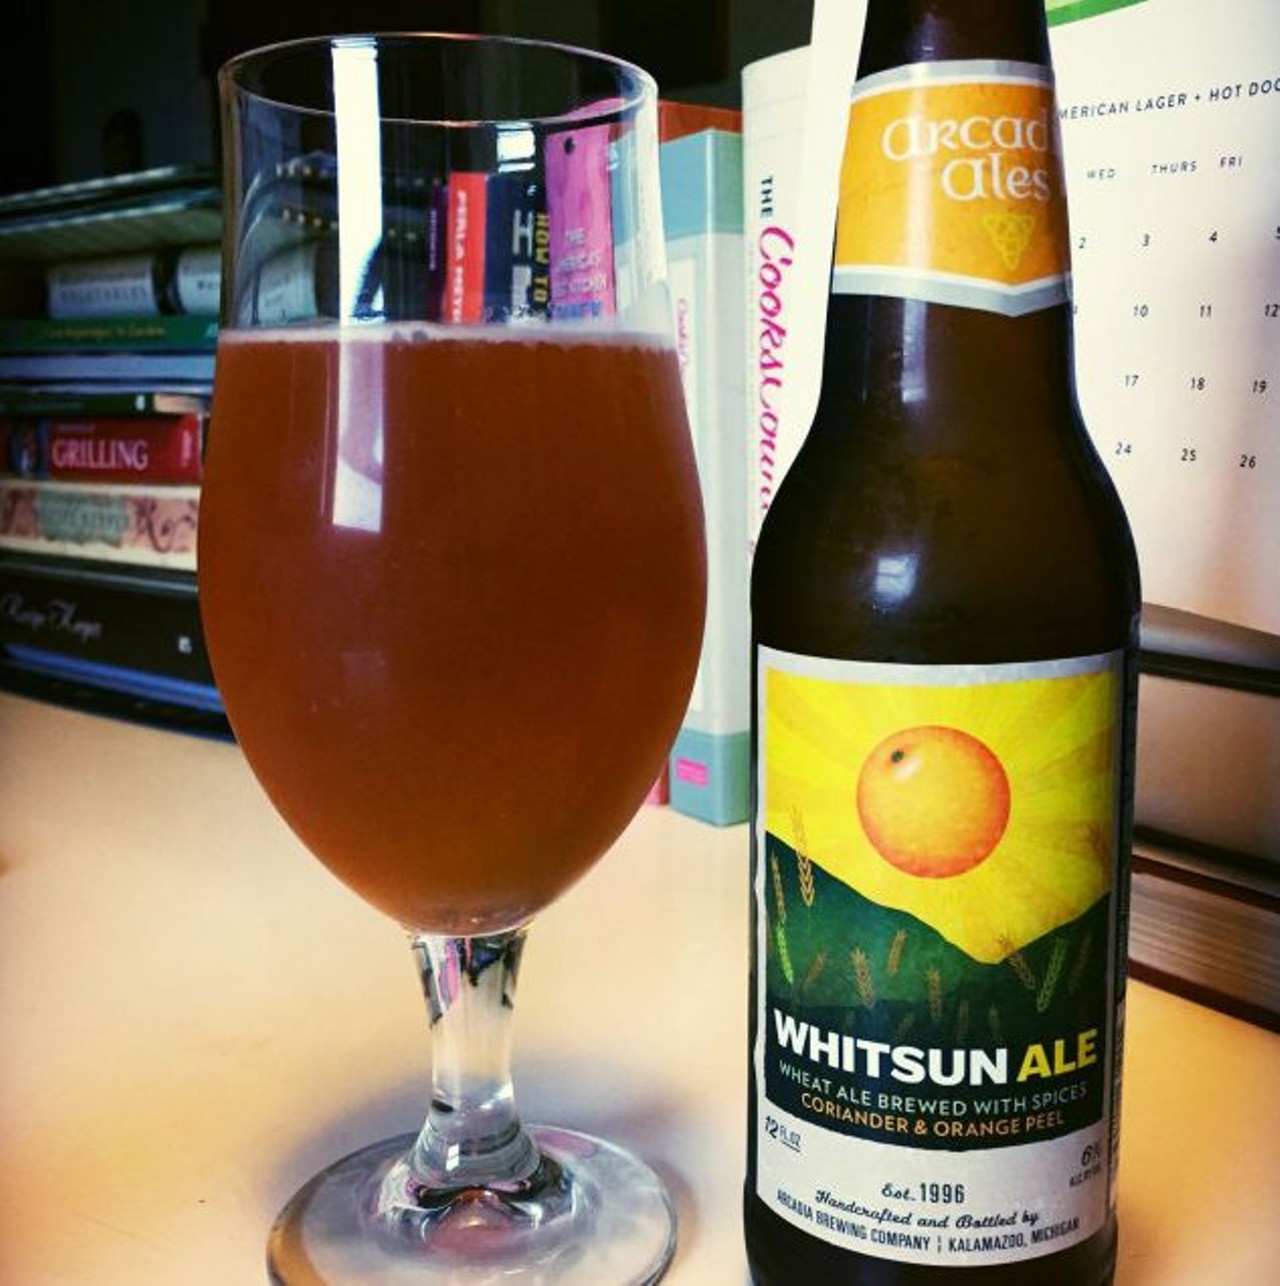 Whitsun - Arcadia 
ABV: 6.0% 
If you're not a fan of the Bell's Oberon, then Whitsun by Arcadia might be your next best.